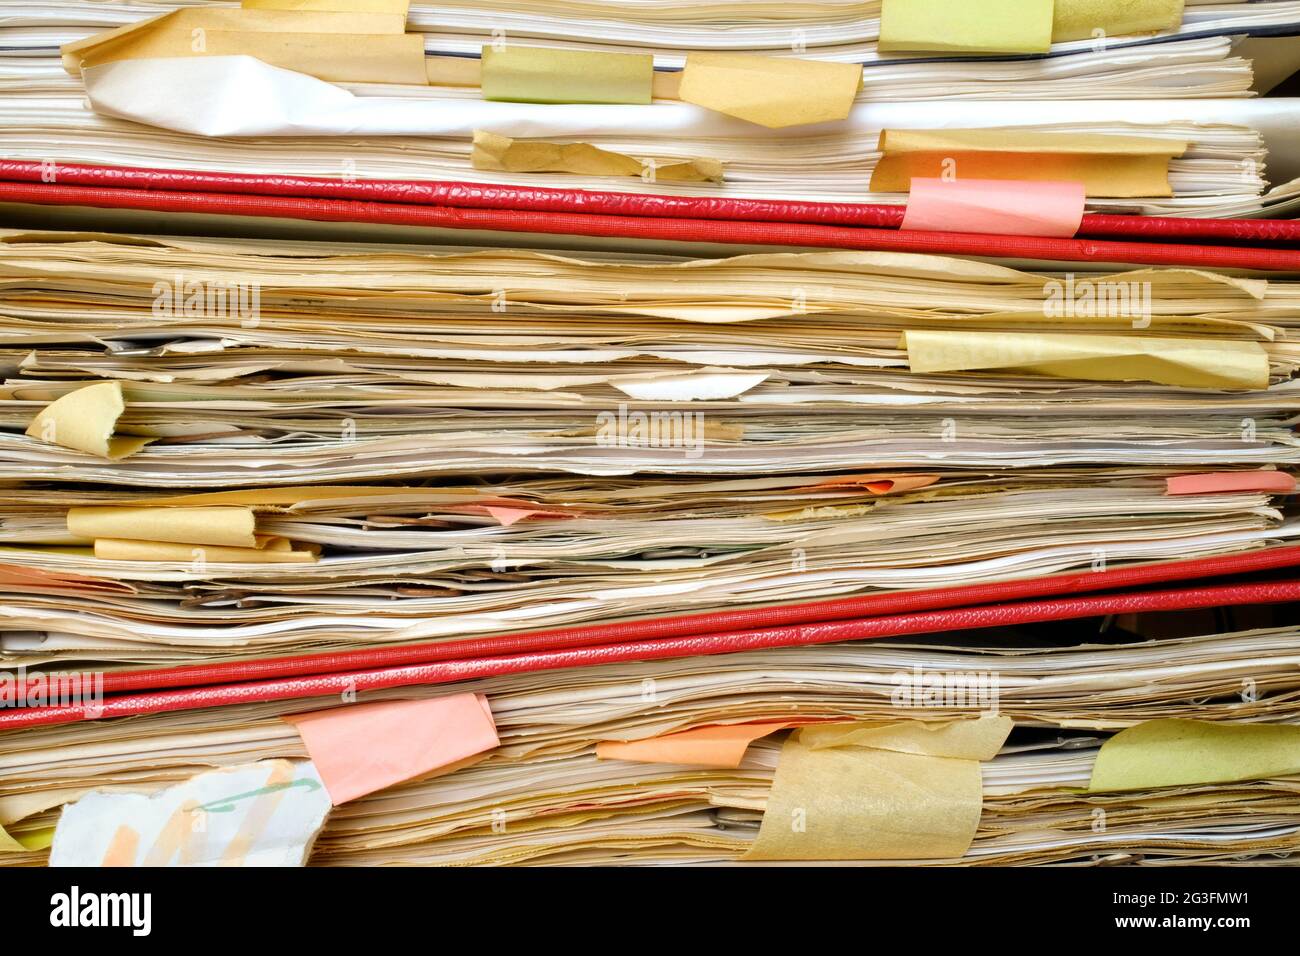 messy old file folders and documents,government, business ,administration, red tape and bureaucracy concept Stock Photo